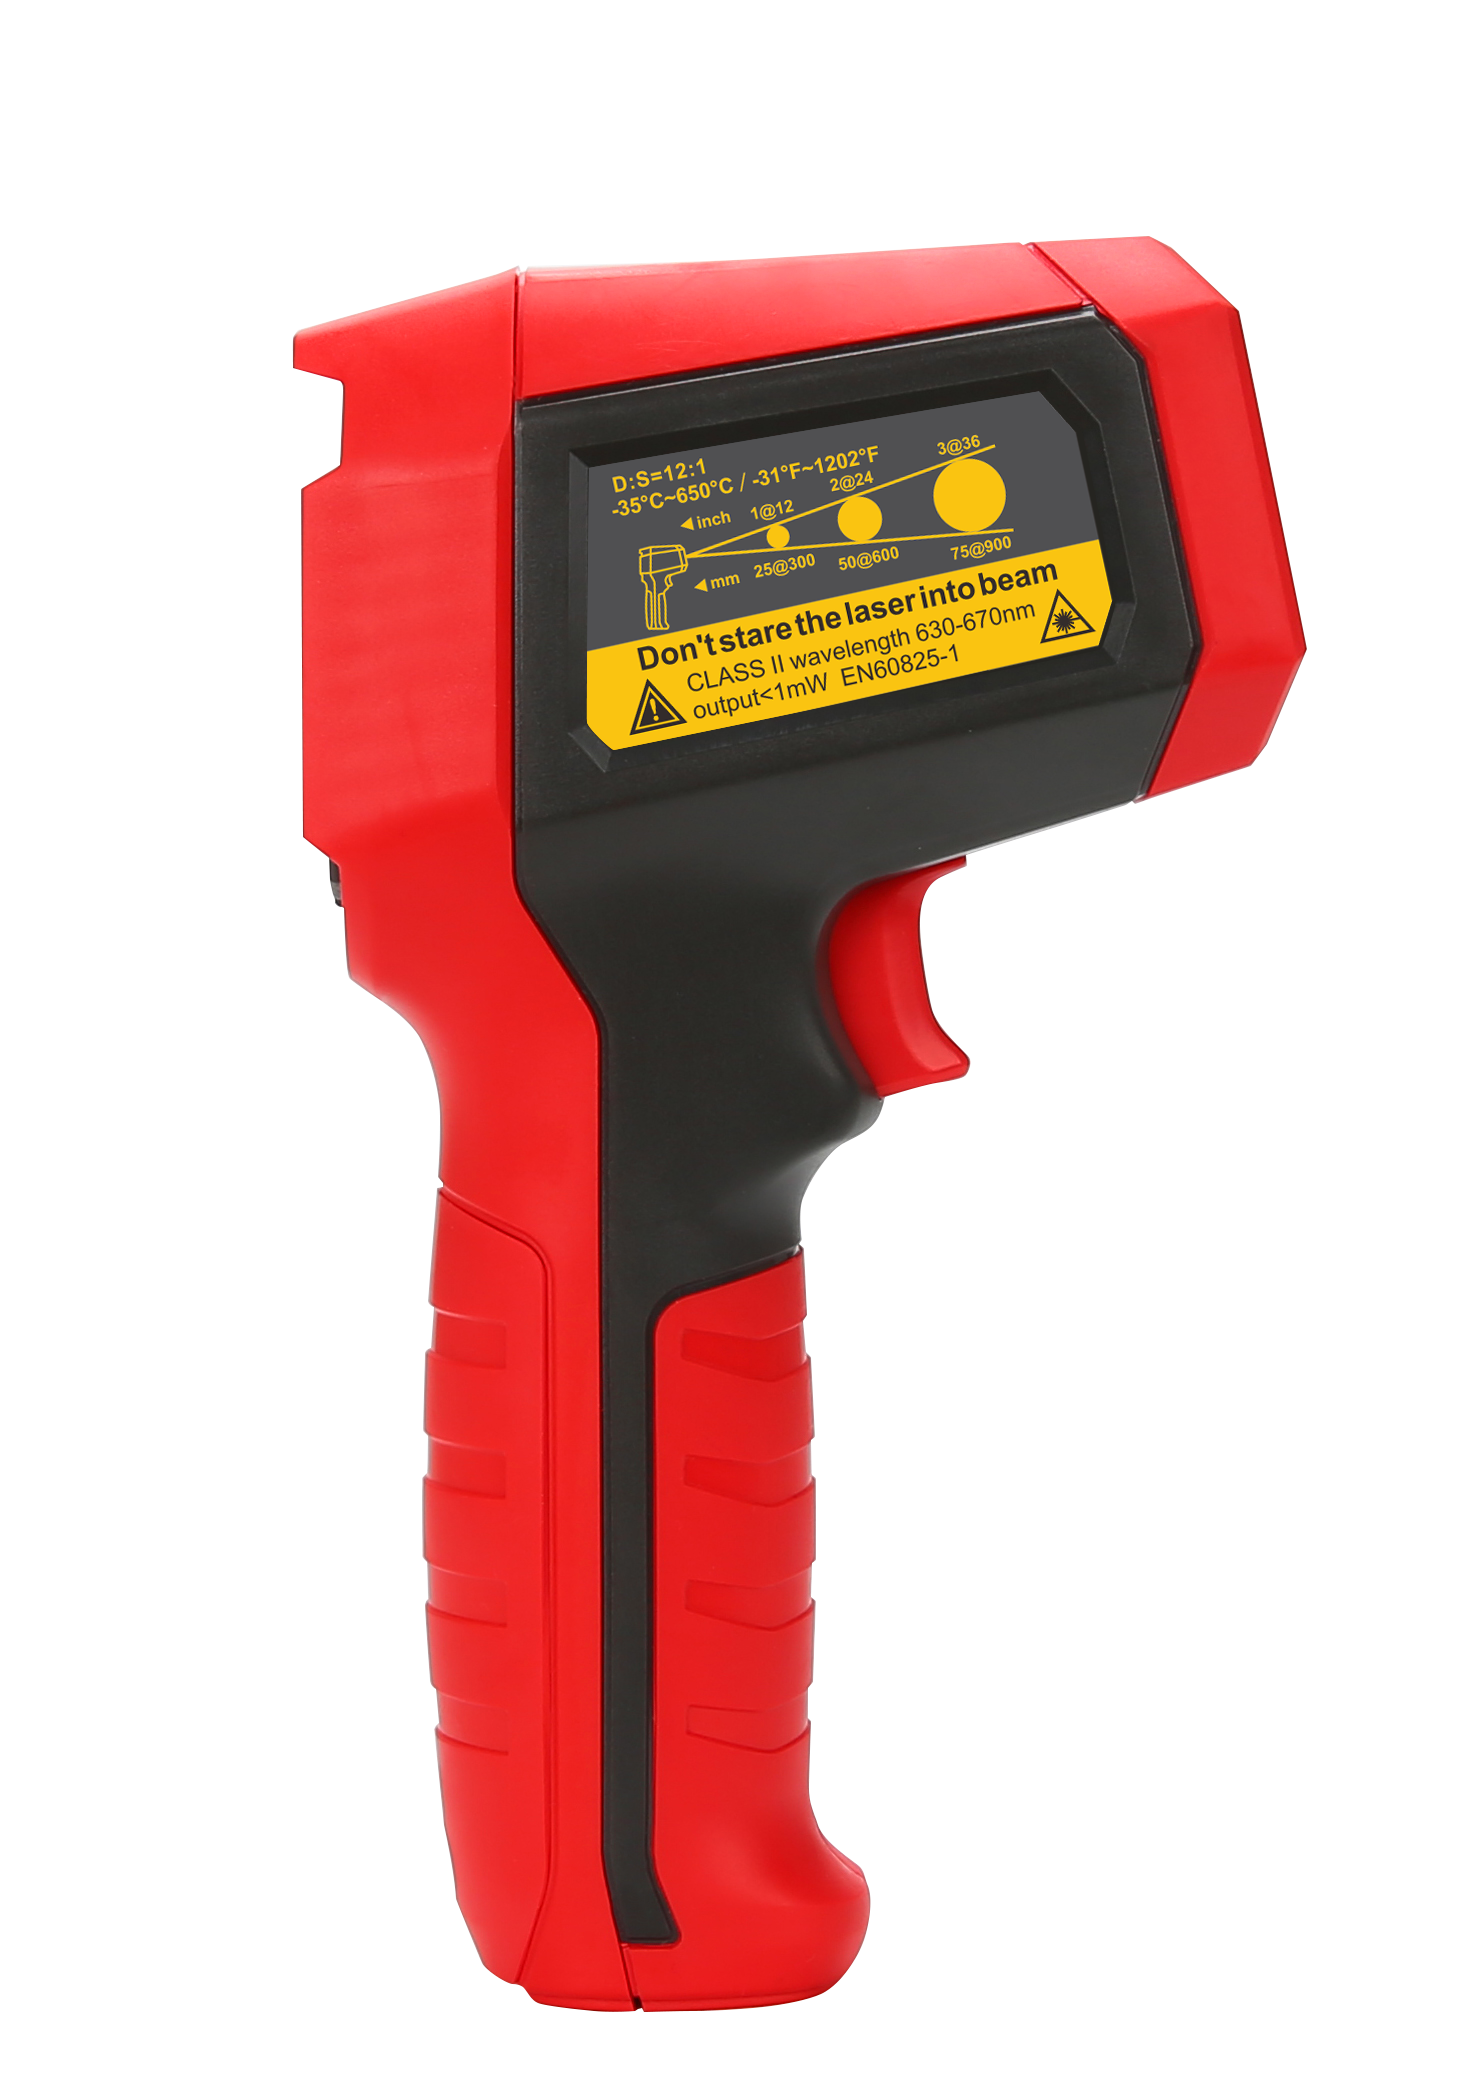 What is Distance-to-Spot (D:S) Ratio of Infrared Thermometer? - UNI-T  Meters